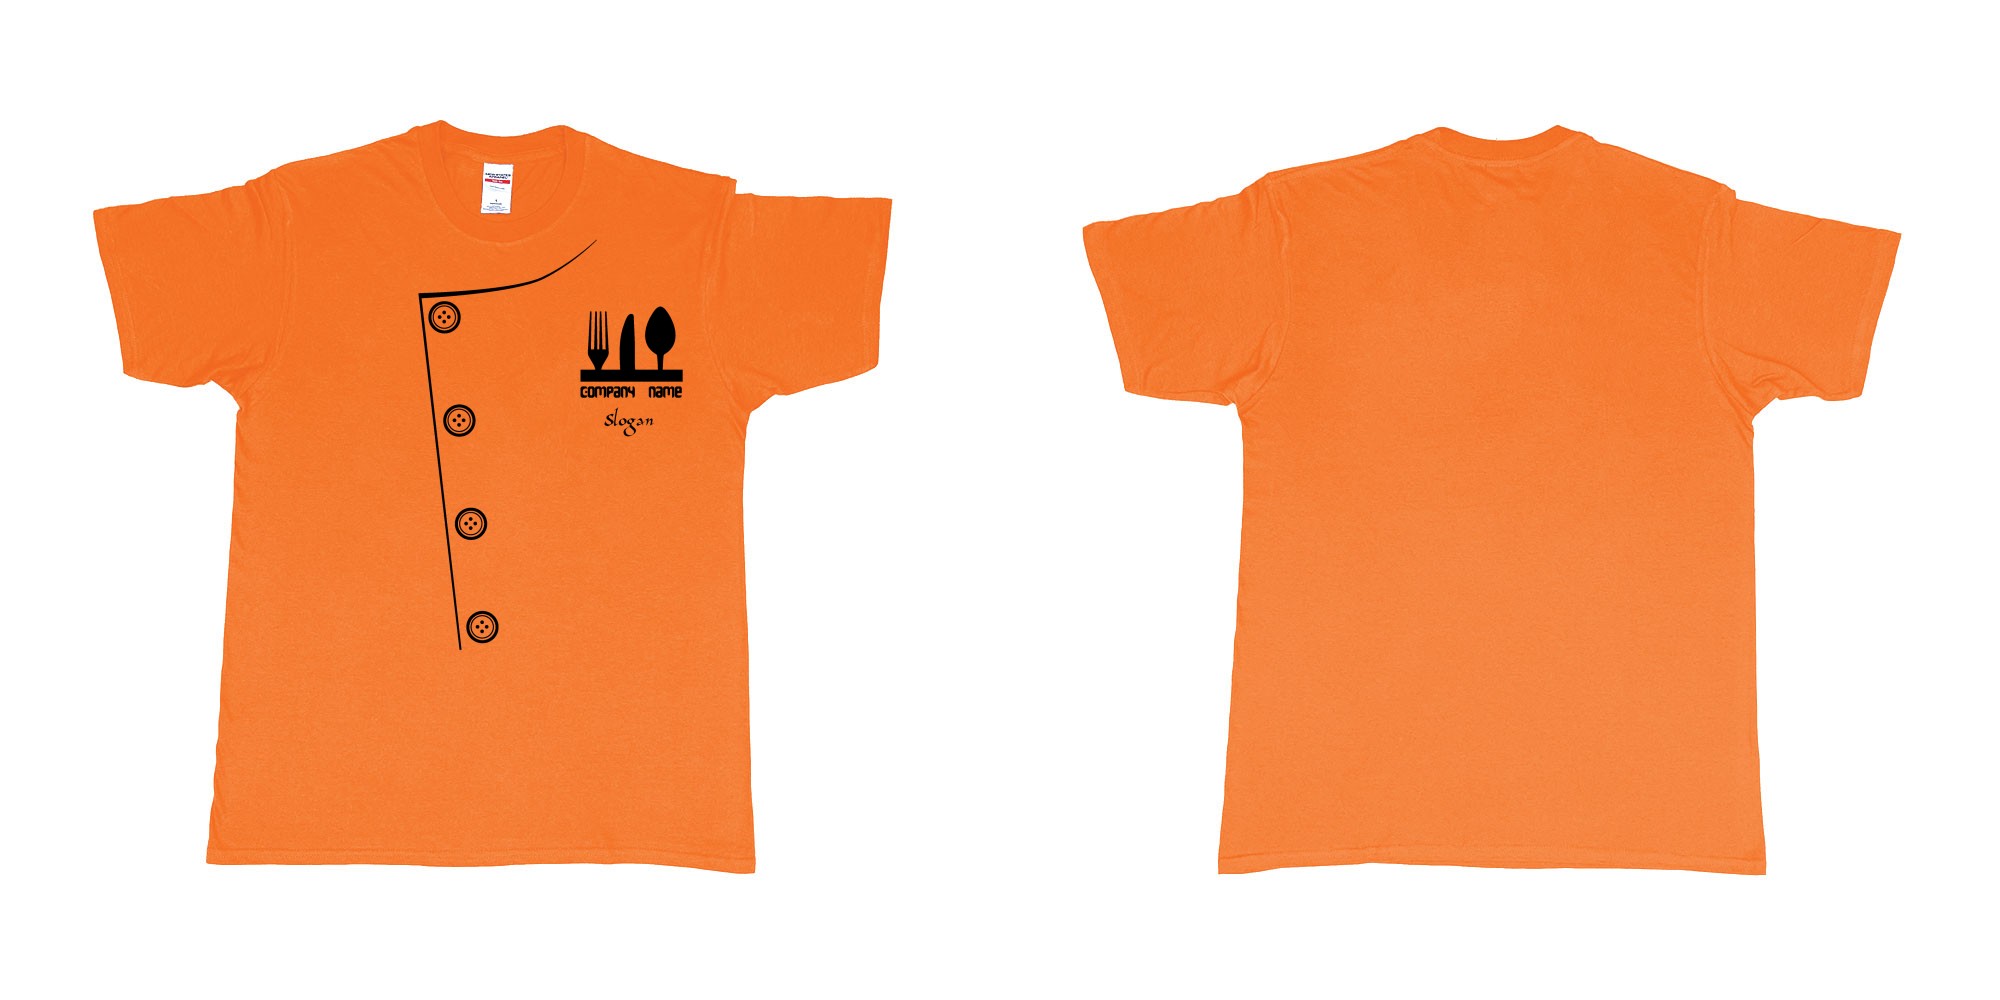 Custom tshirt design chef uniform with fork knife and spoon in fabric color orange choice your own text made in Bali by The Pirate Way